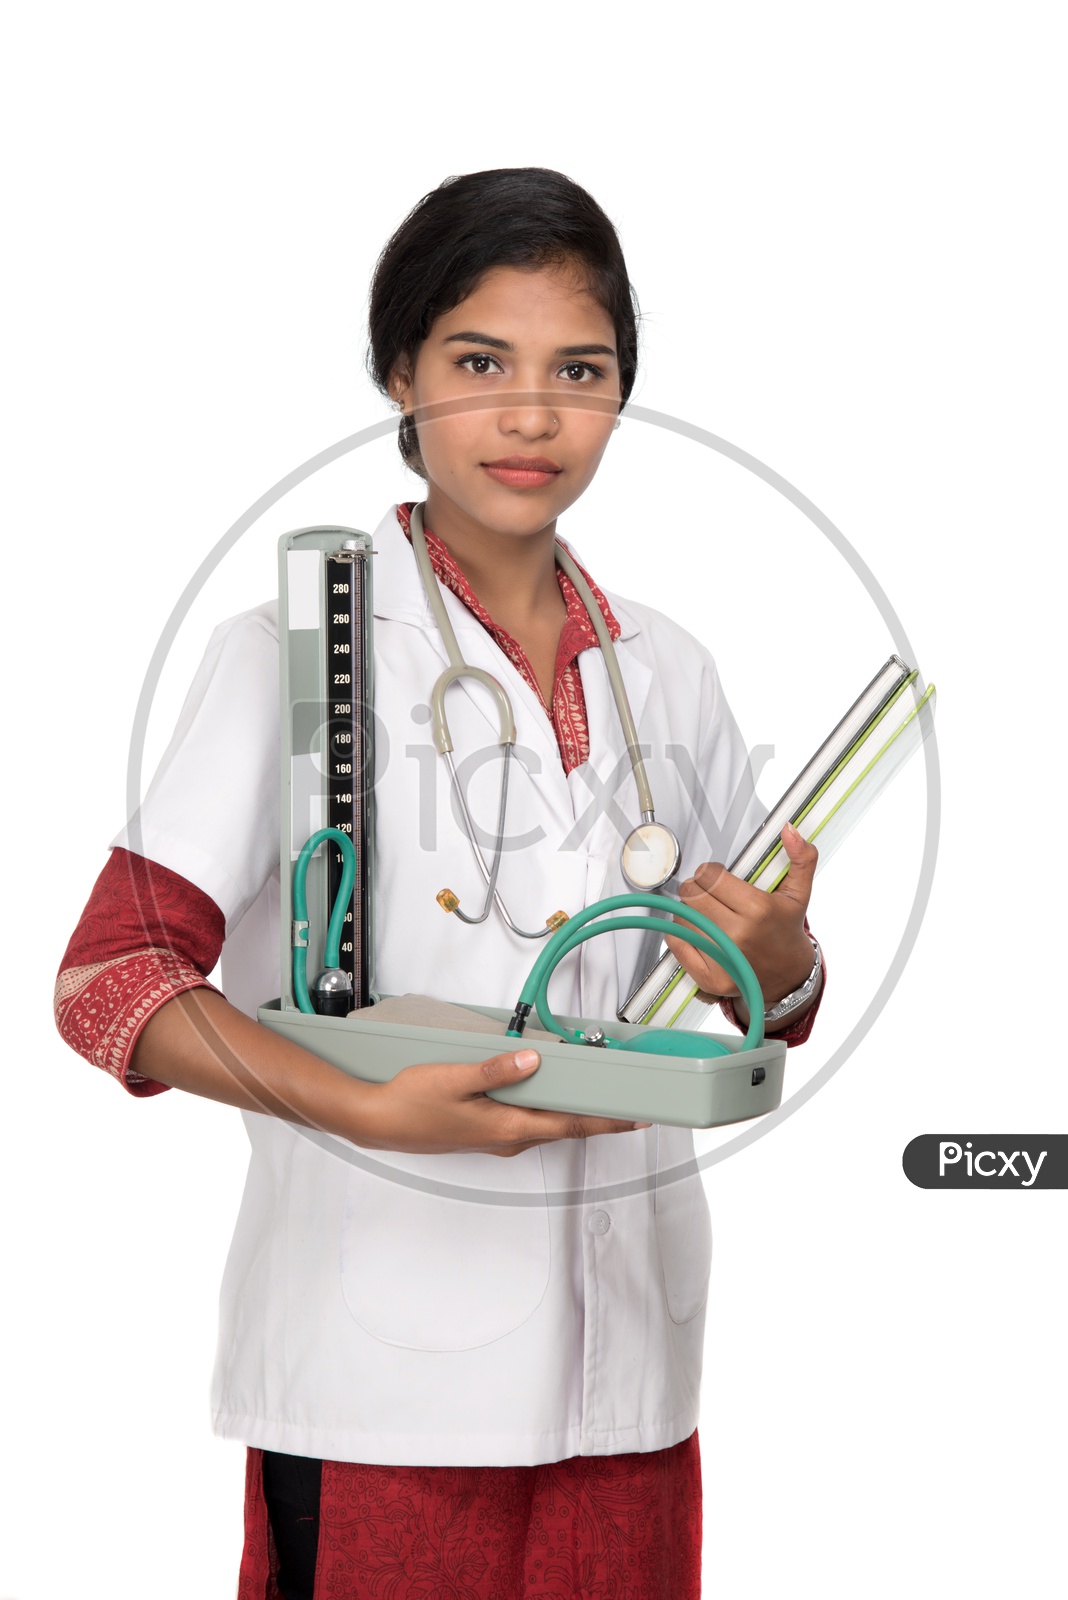 Young Lady Doctor With Blood Pressure Monitoring Gadget in Hand On an Isolated White Background